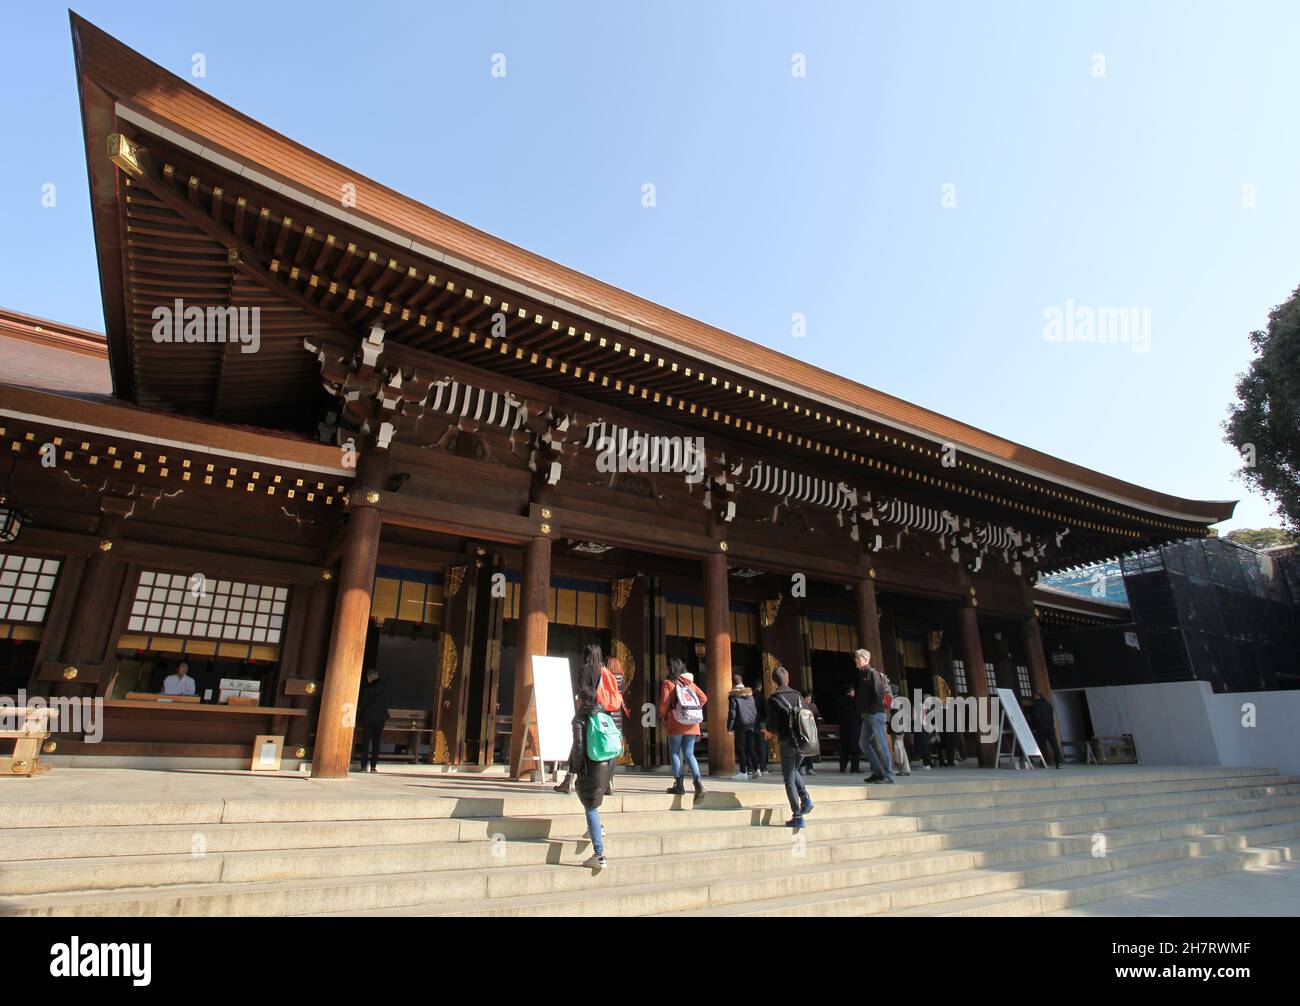 The Meiji Jingu Shrine in Shibuya City, Tokyo, Japan. The shrine is a Shinto shrine and is made of natural coloured wood. Several visitors are present. Stock Photo